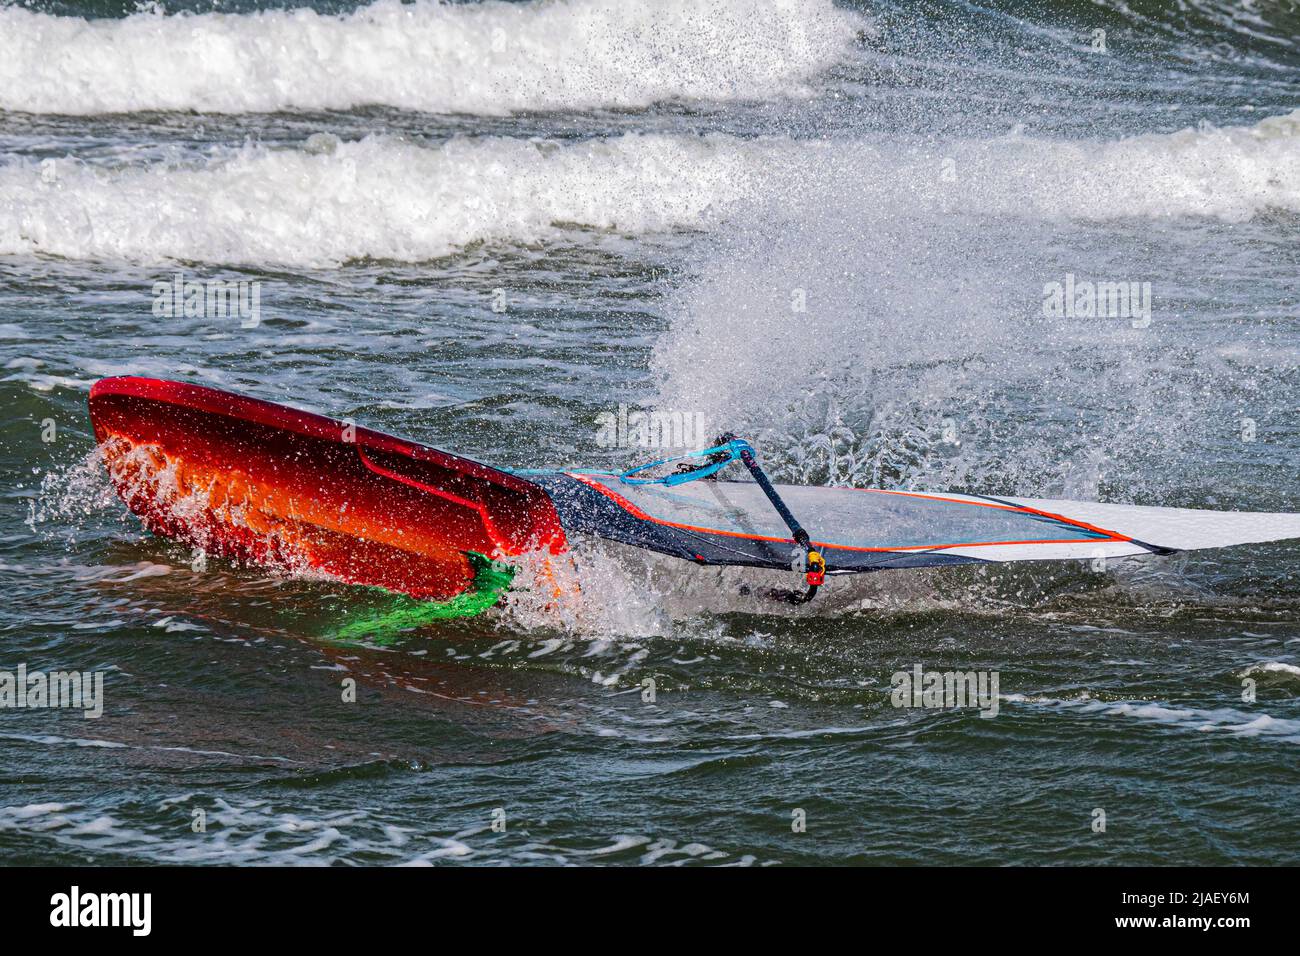 Close up of a wind foil board capsized in a wave Stock Photo